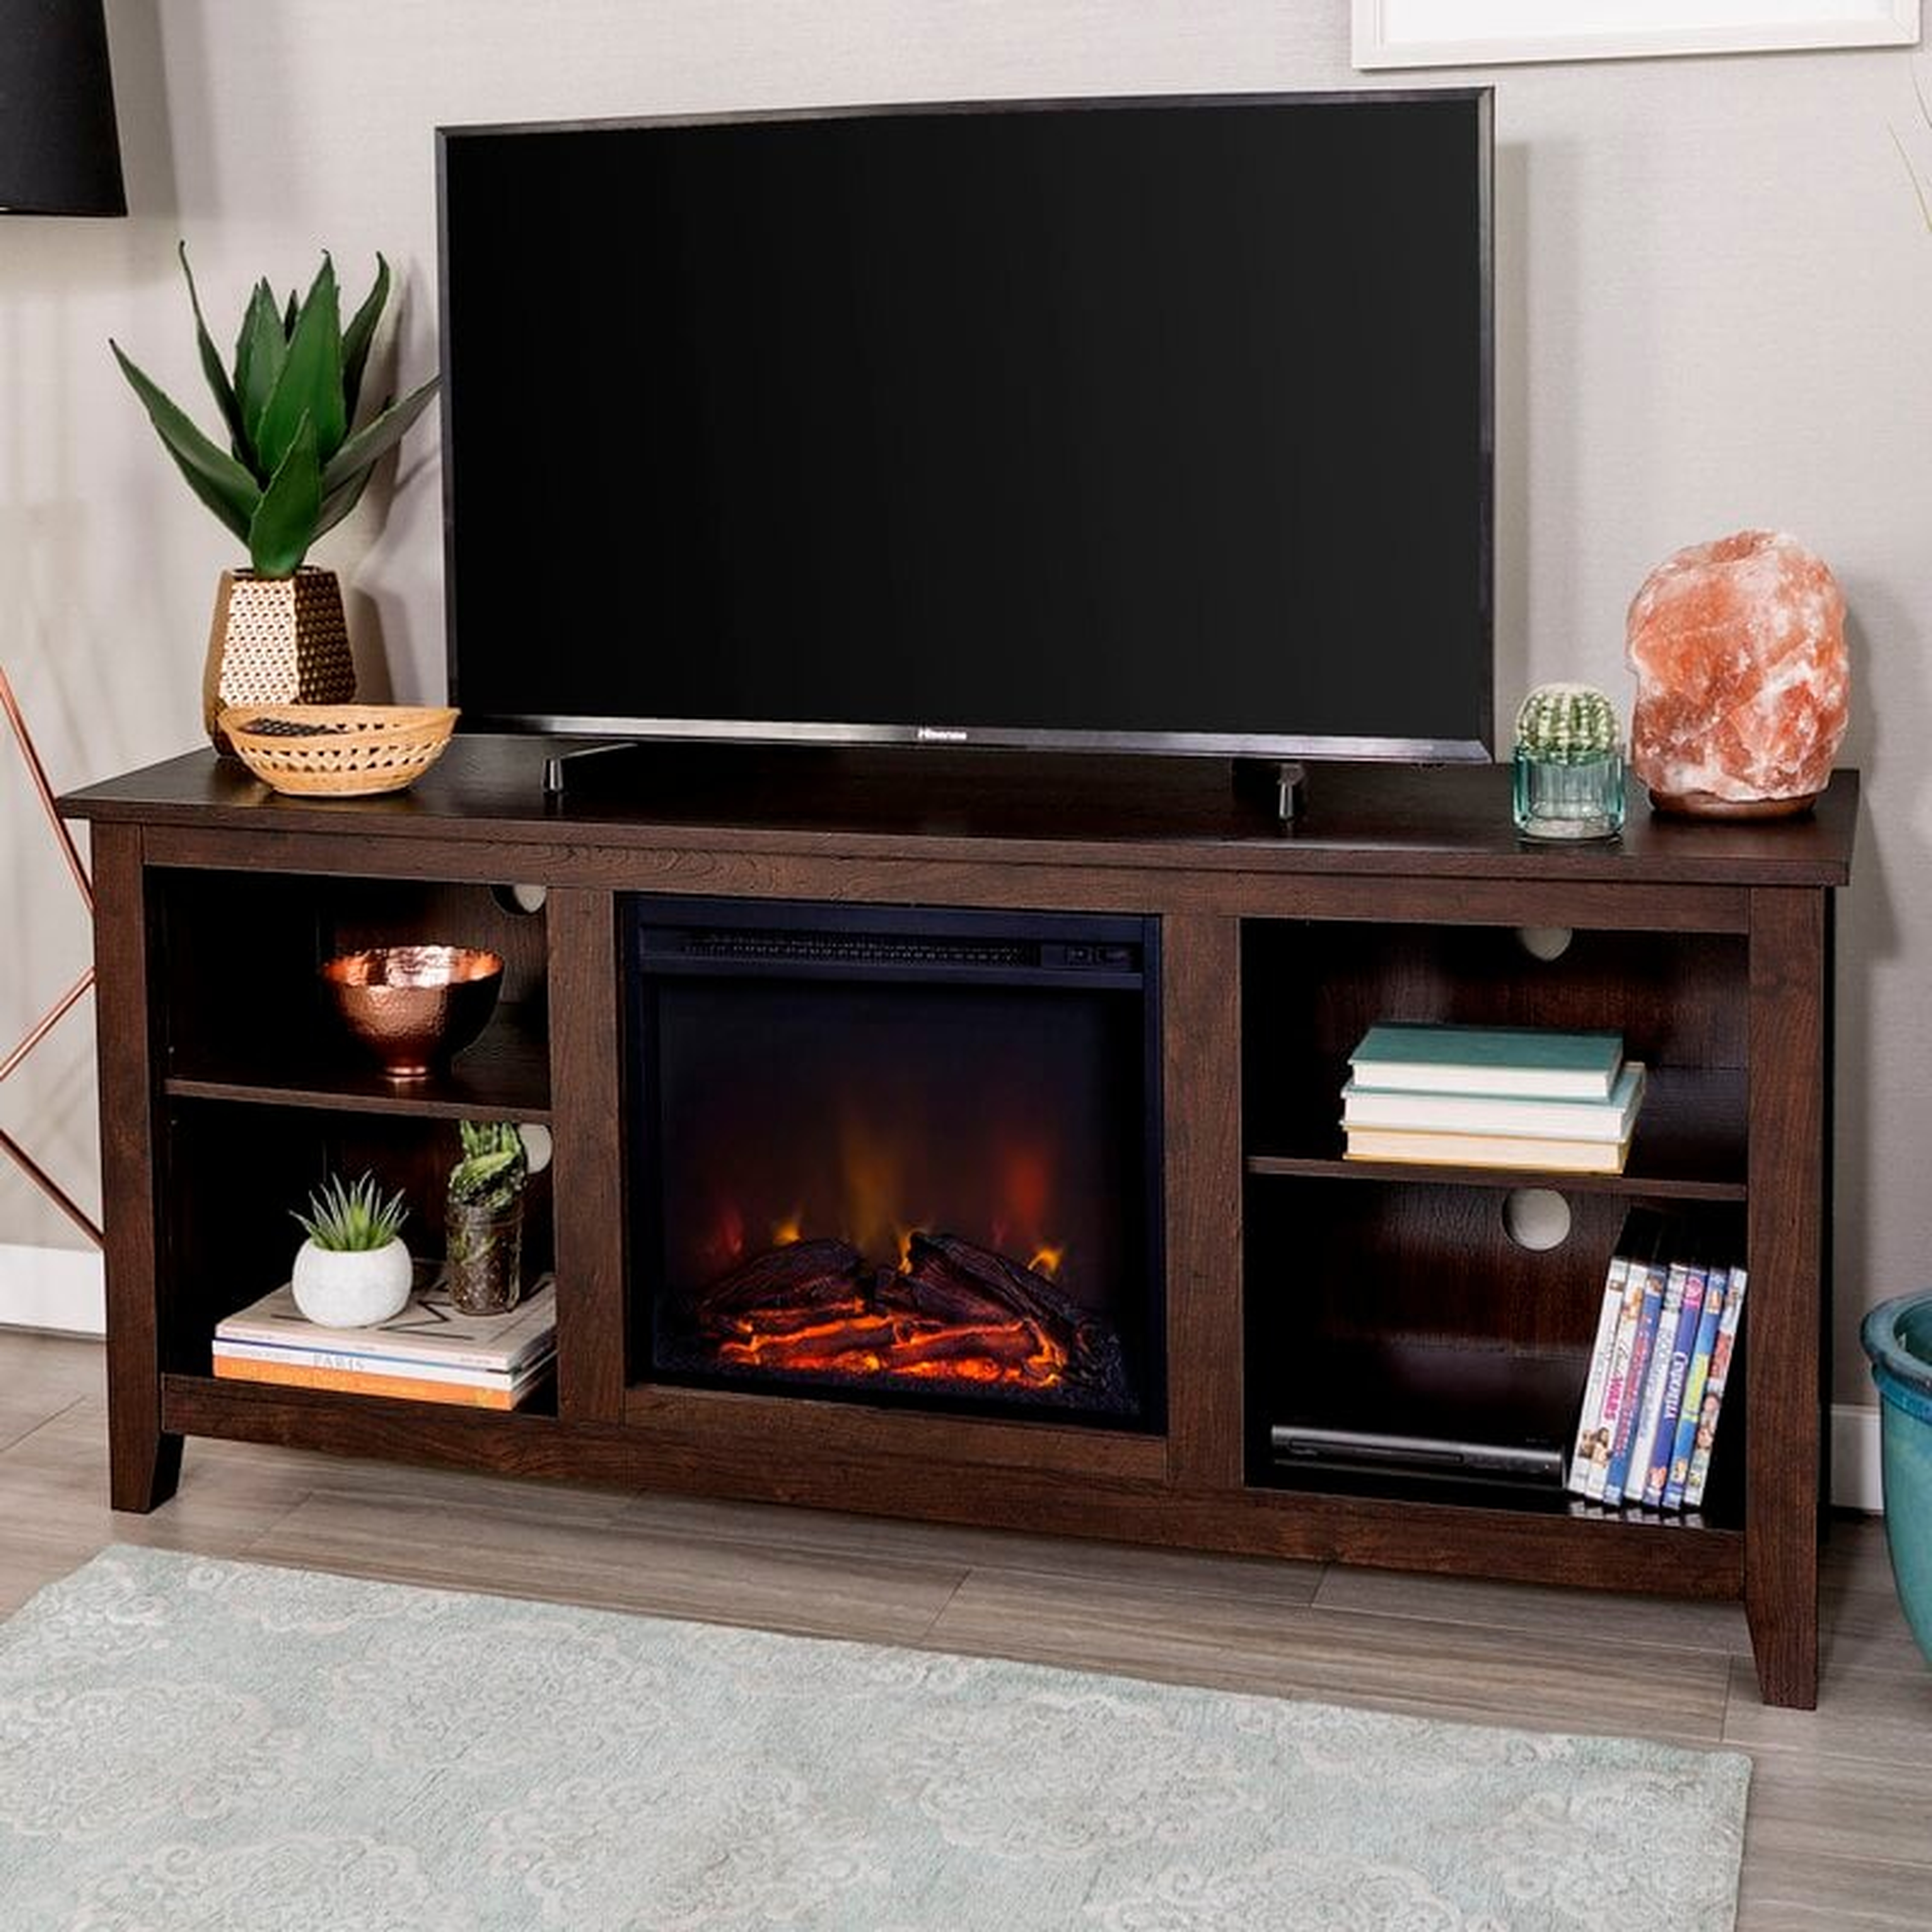 Sunbury TV Stand for TVs up to 60 inches with Fireplace Included - Wayfair